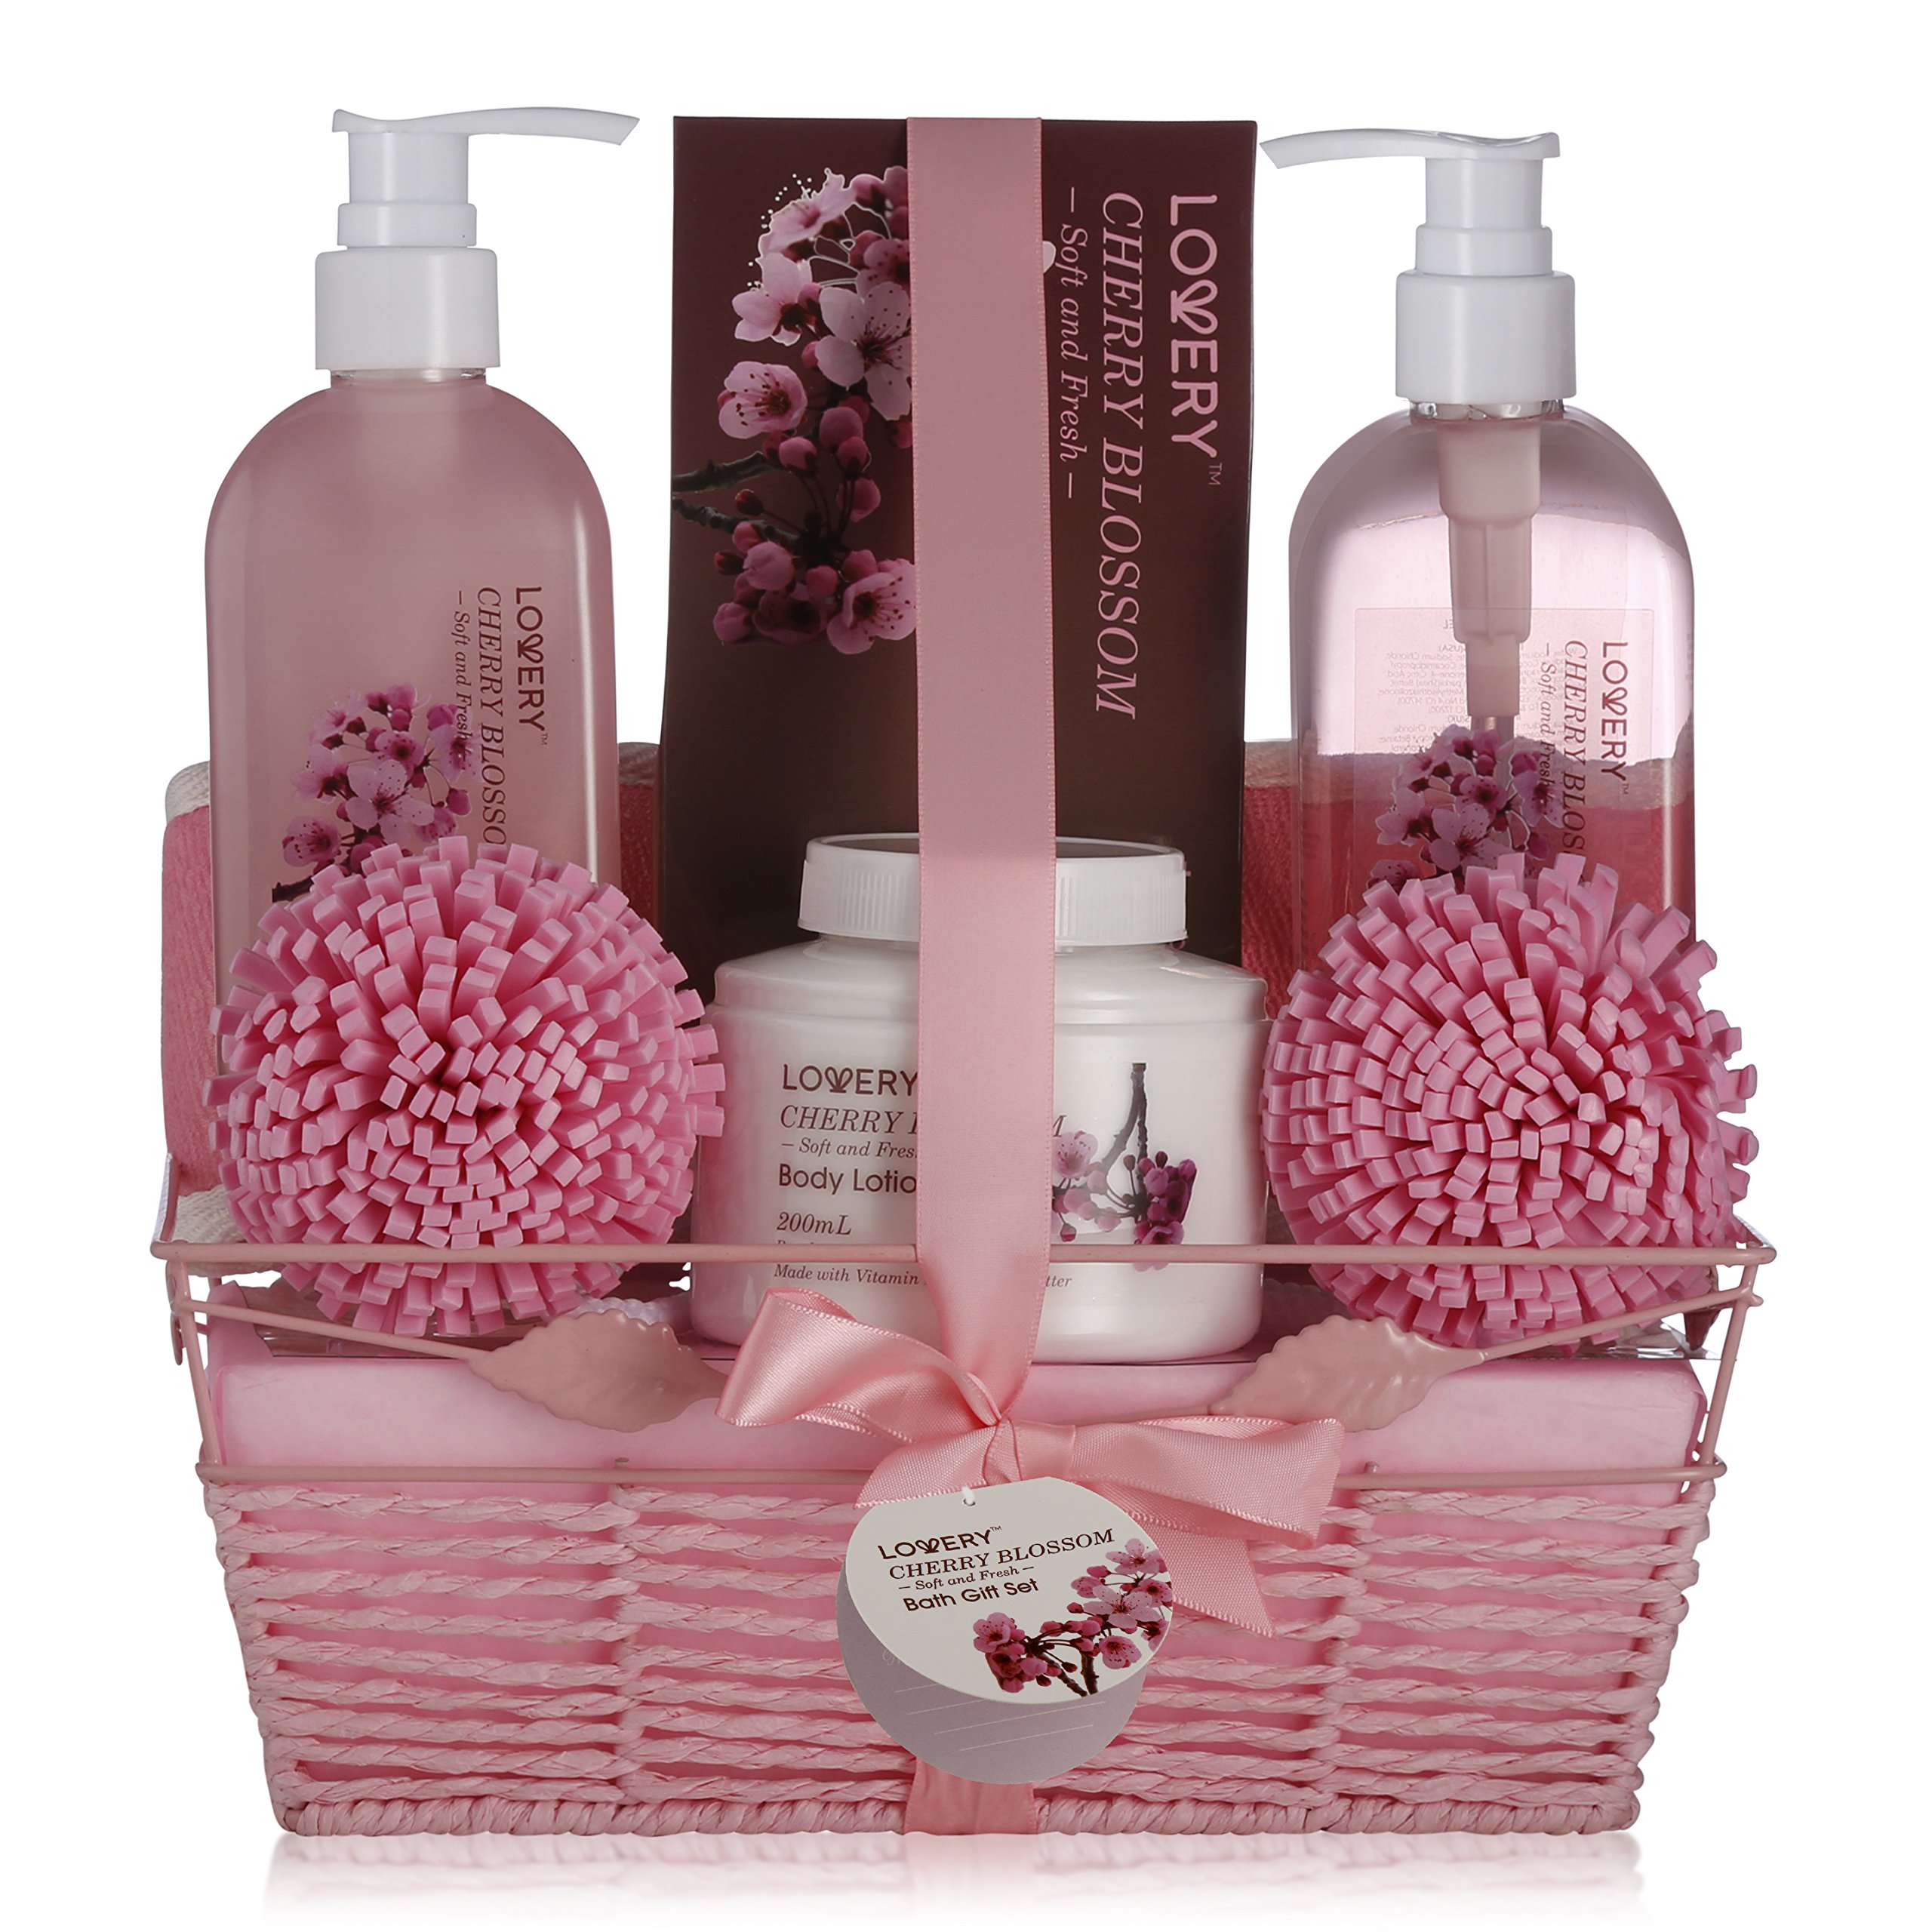 Birthday Gifts For Her, Spa Gift Basket in Cherry Blossom Fragrance - 8pc Bath Set with Shower Gel, Bubble Bath, Bath Salt, Lotion & More! Great Wedding, Anniversary or Graduation Gift for Women